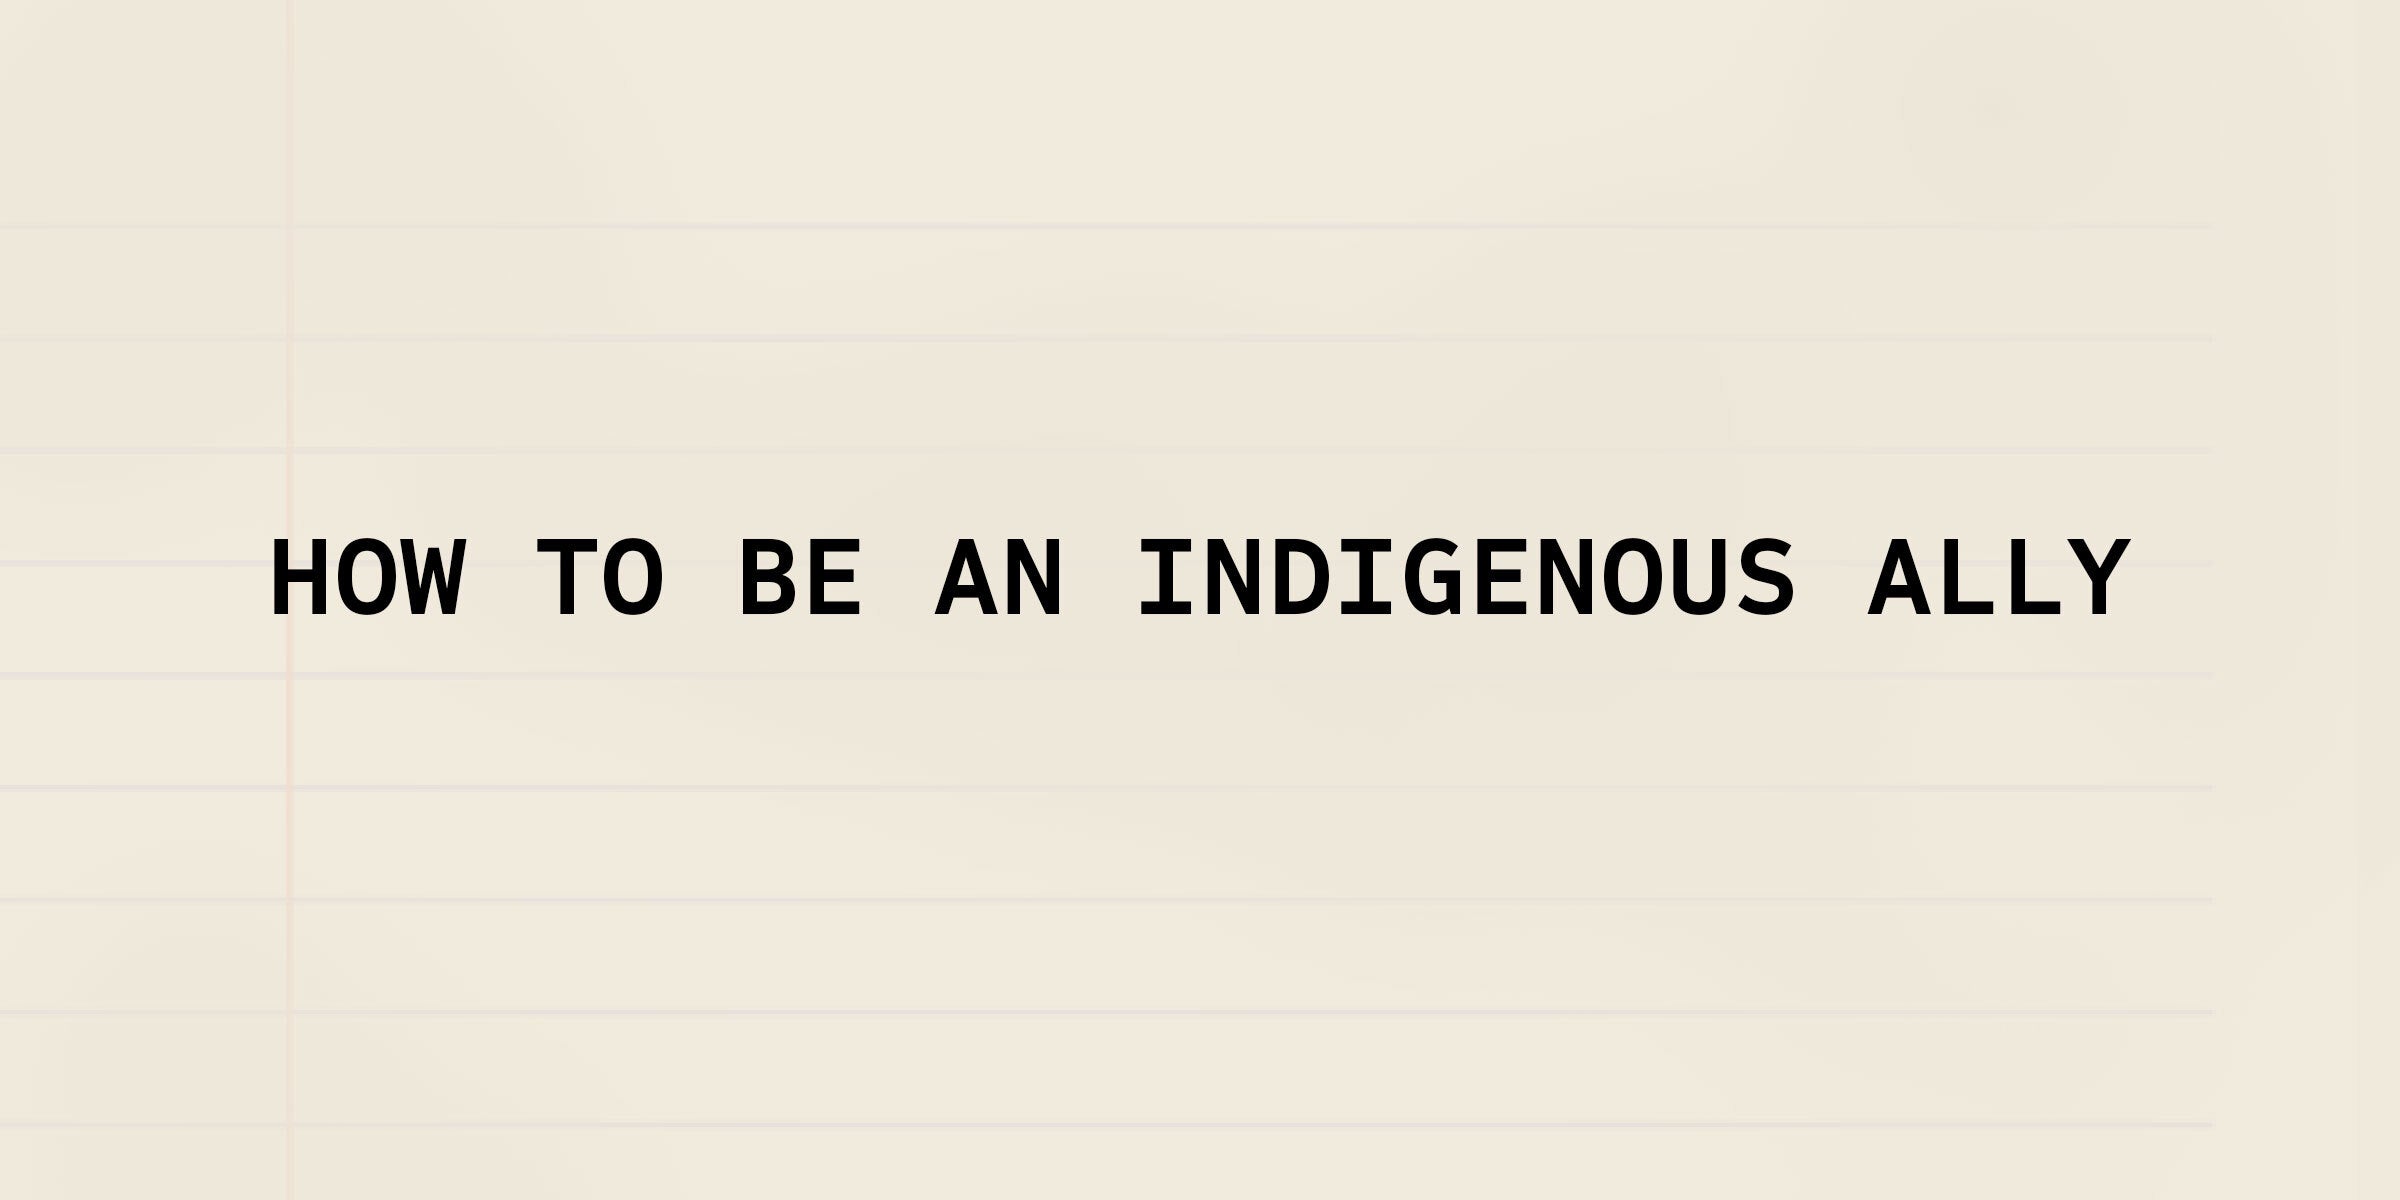 Monday Must: How To Be An Indigenous Ally